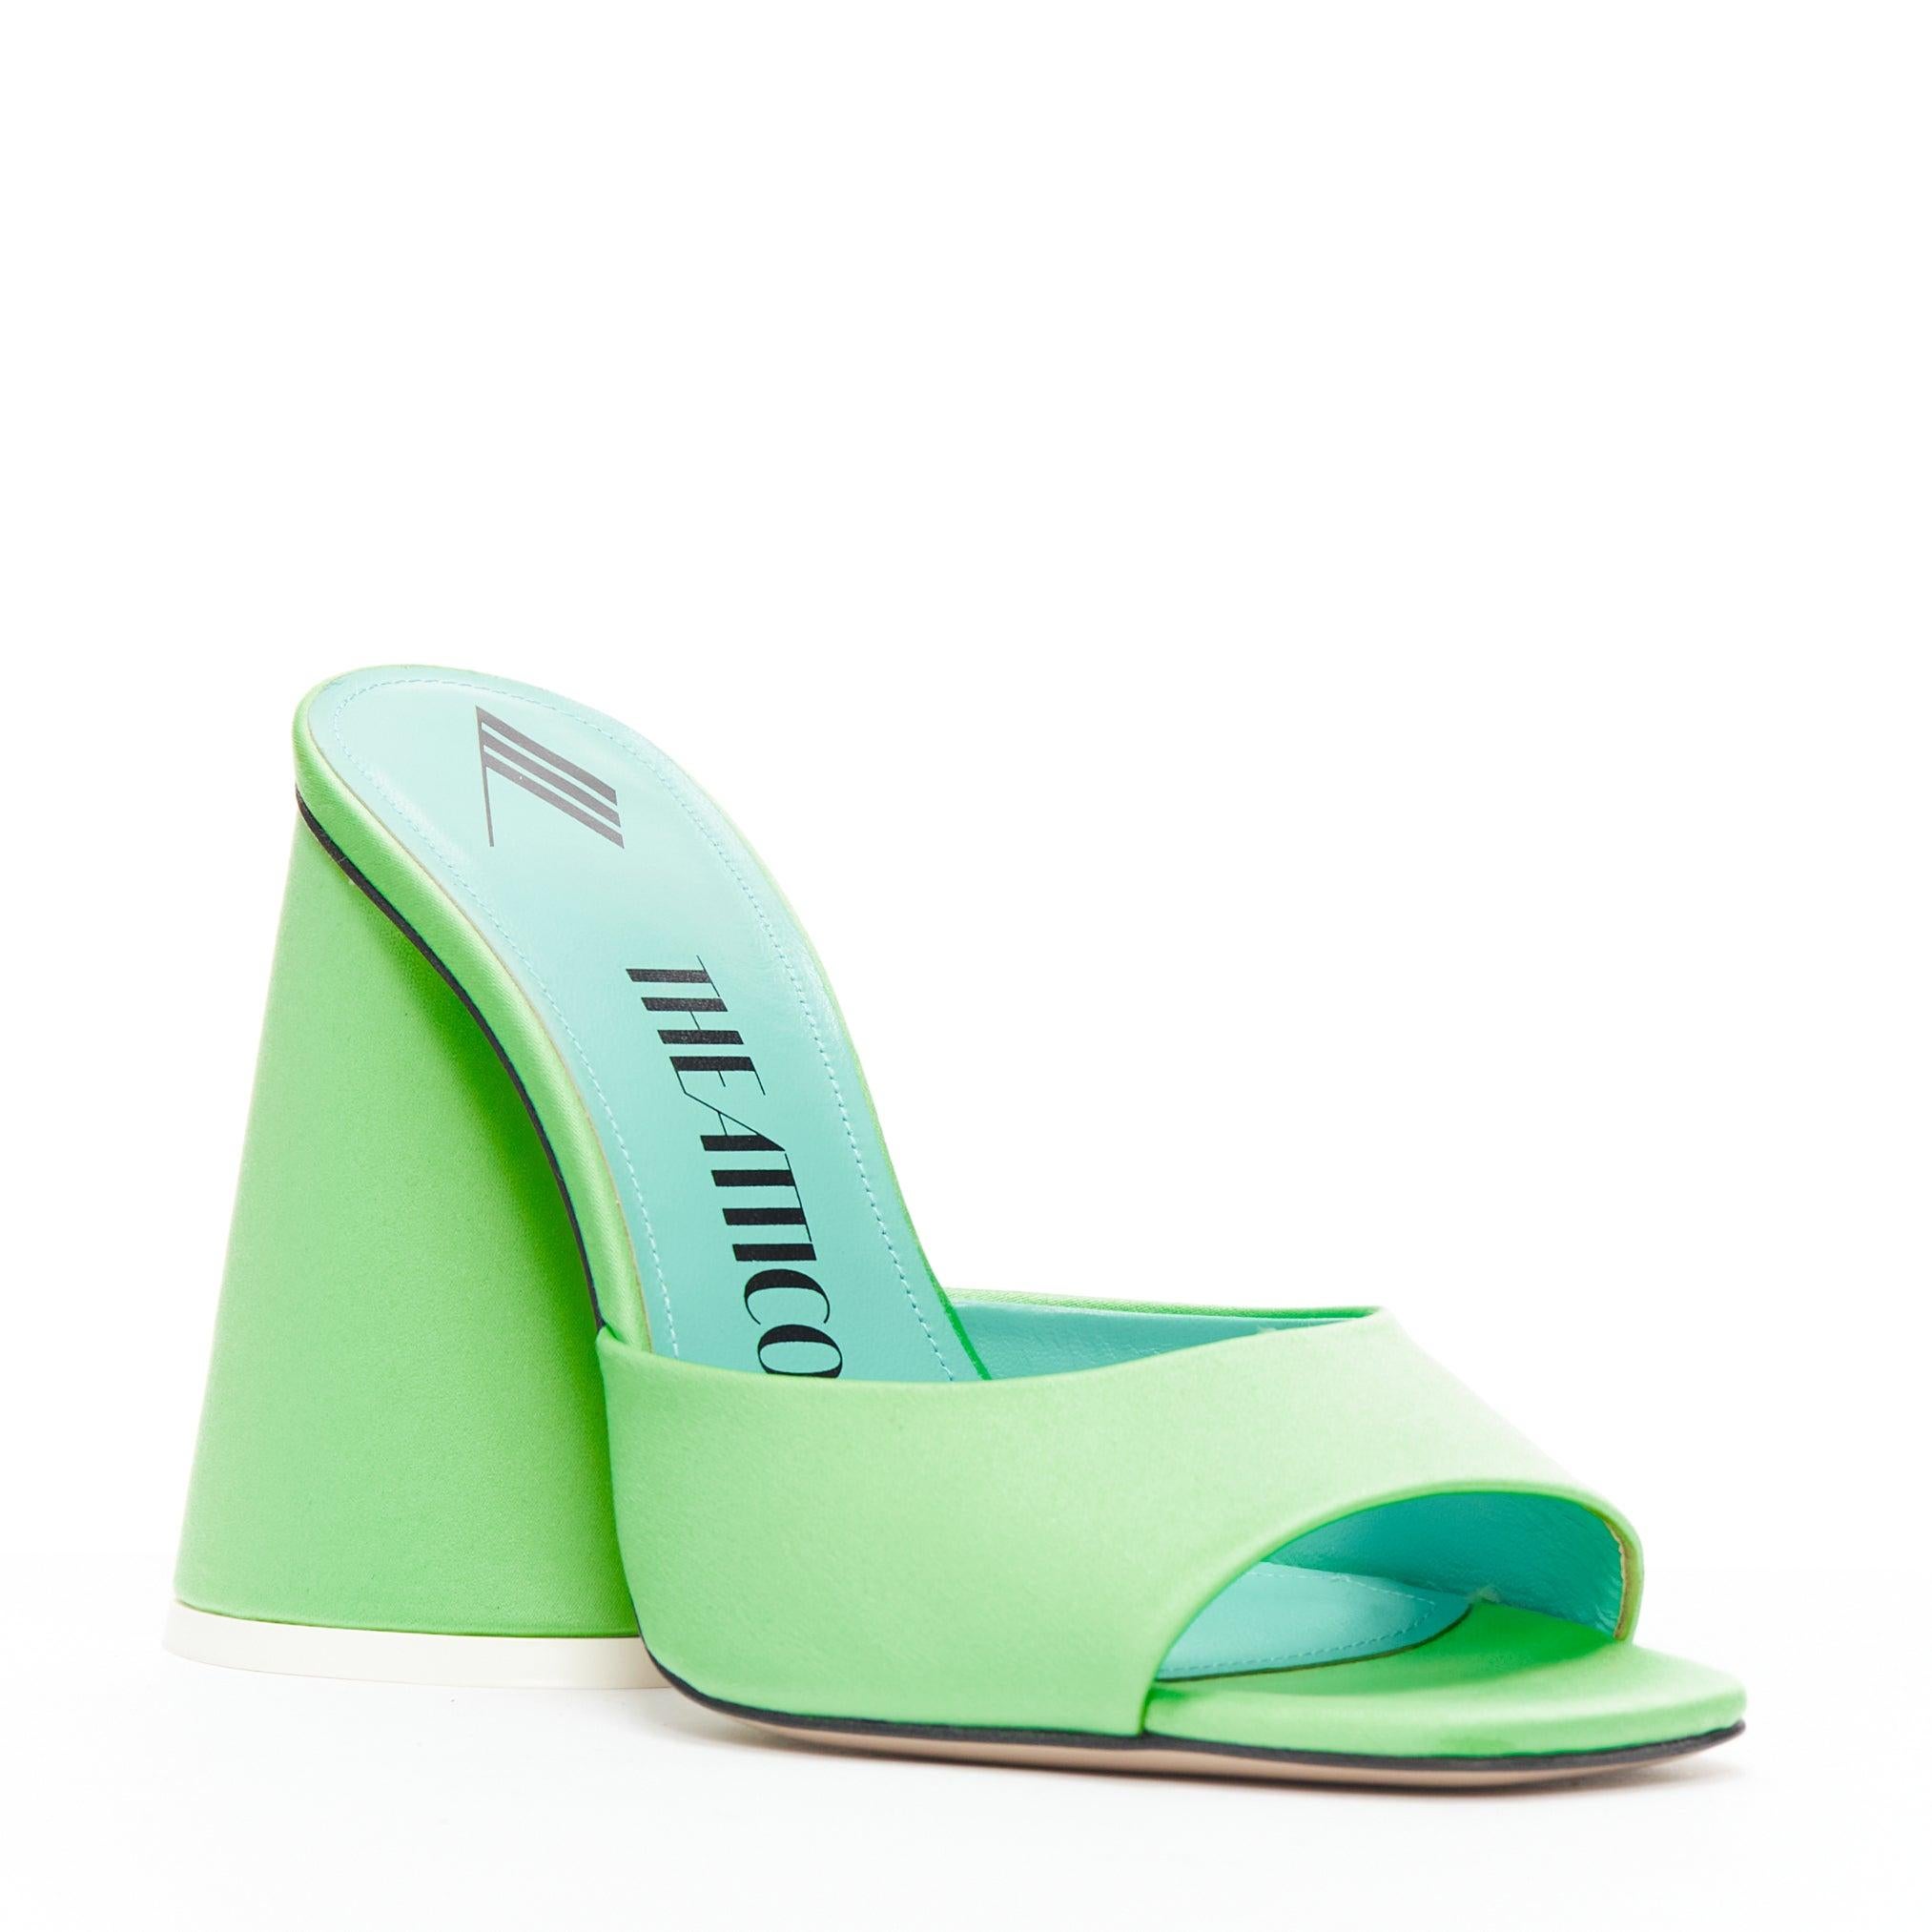 THE ATTICO Luz mint green satin sculptural cone heel open toe mule EU36.5
Reference: JACG/A00150
Brand: The Attico
Model: Luz
Material: Satin
Color: Green
Pattern: Solid
Closure: Slip On
Extra Details: Exaggerated cone shaped heel. Square open